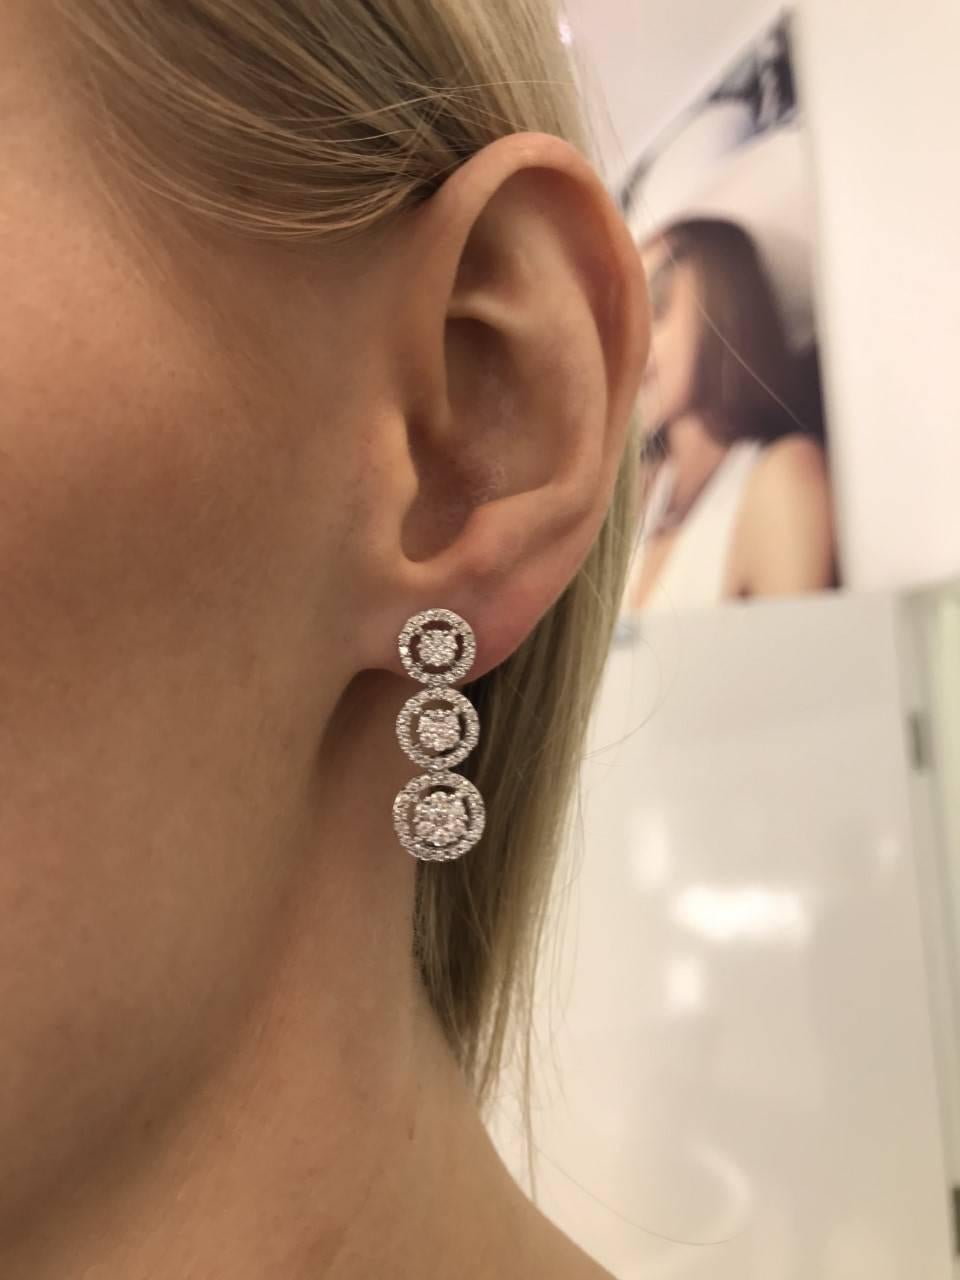 These Stunning 2.00 Carat Three Tier Cluster Drop Diamond Earrings Color H Clarity SI1 set in 18 Karat White Gold are perfect for any occasion. British Hallmarked.

Made by Hasbani Diamonds London. We believe in creating your own unique look by